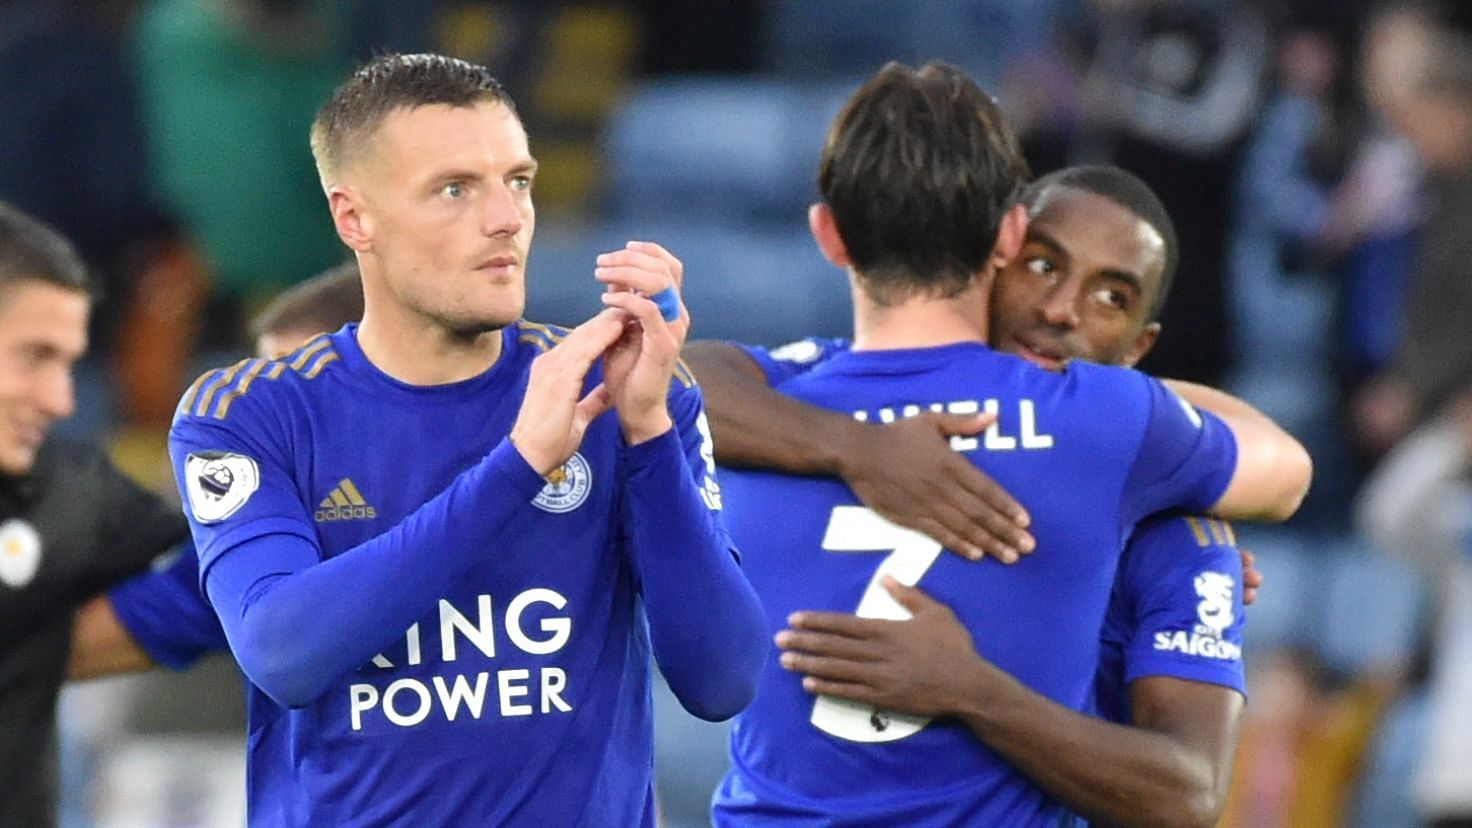 Leicester climbed to third in the Premier League by routing 10-man Newcastle 5-0 with Jamie Vardy bagging a second-half brace.